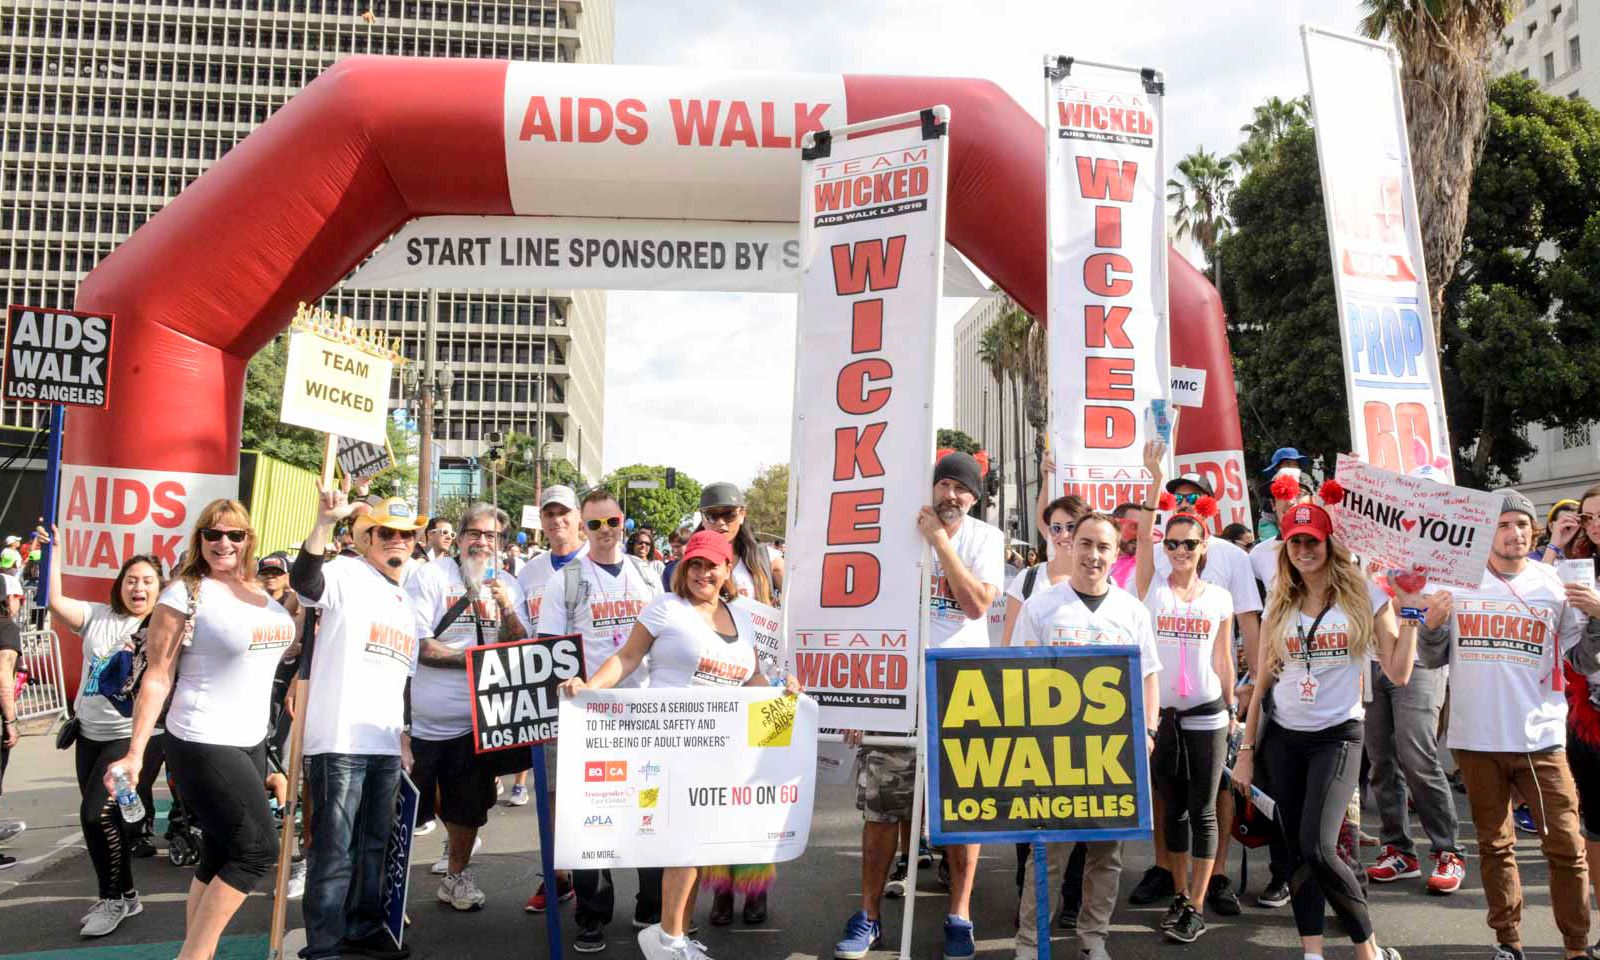 Jessica Drake, Team Wicked Raise Over $21K for AIDS Walk L.A.